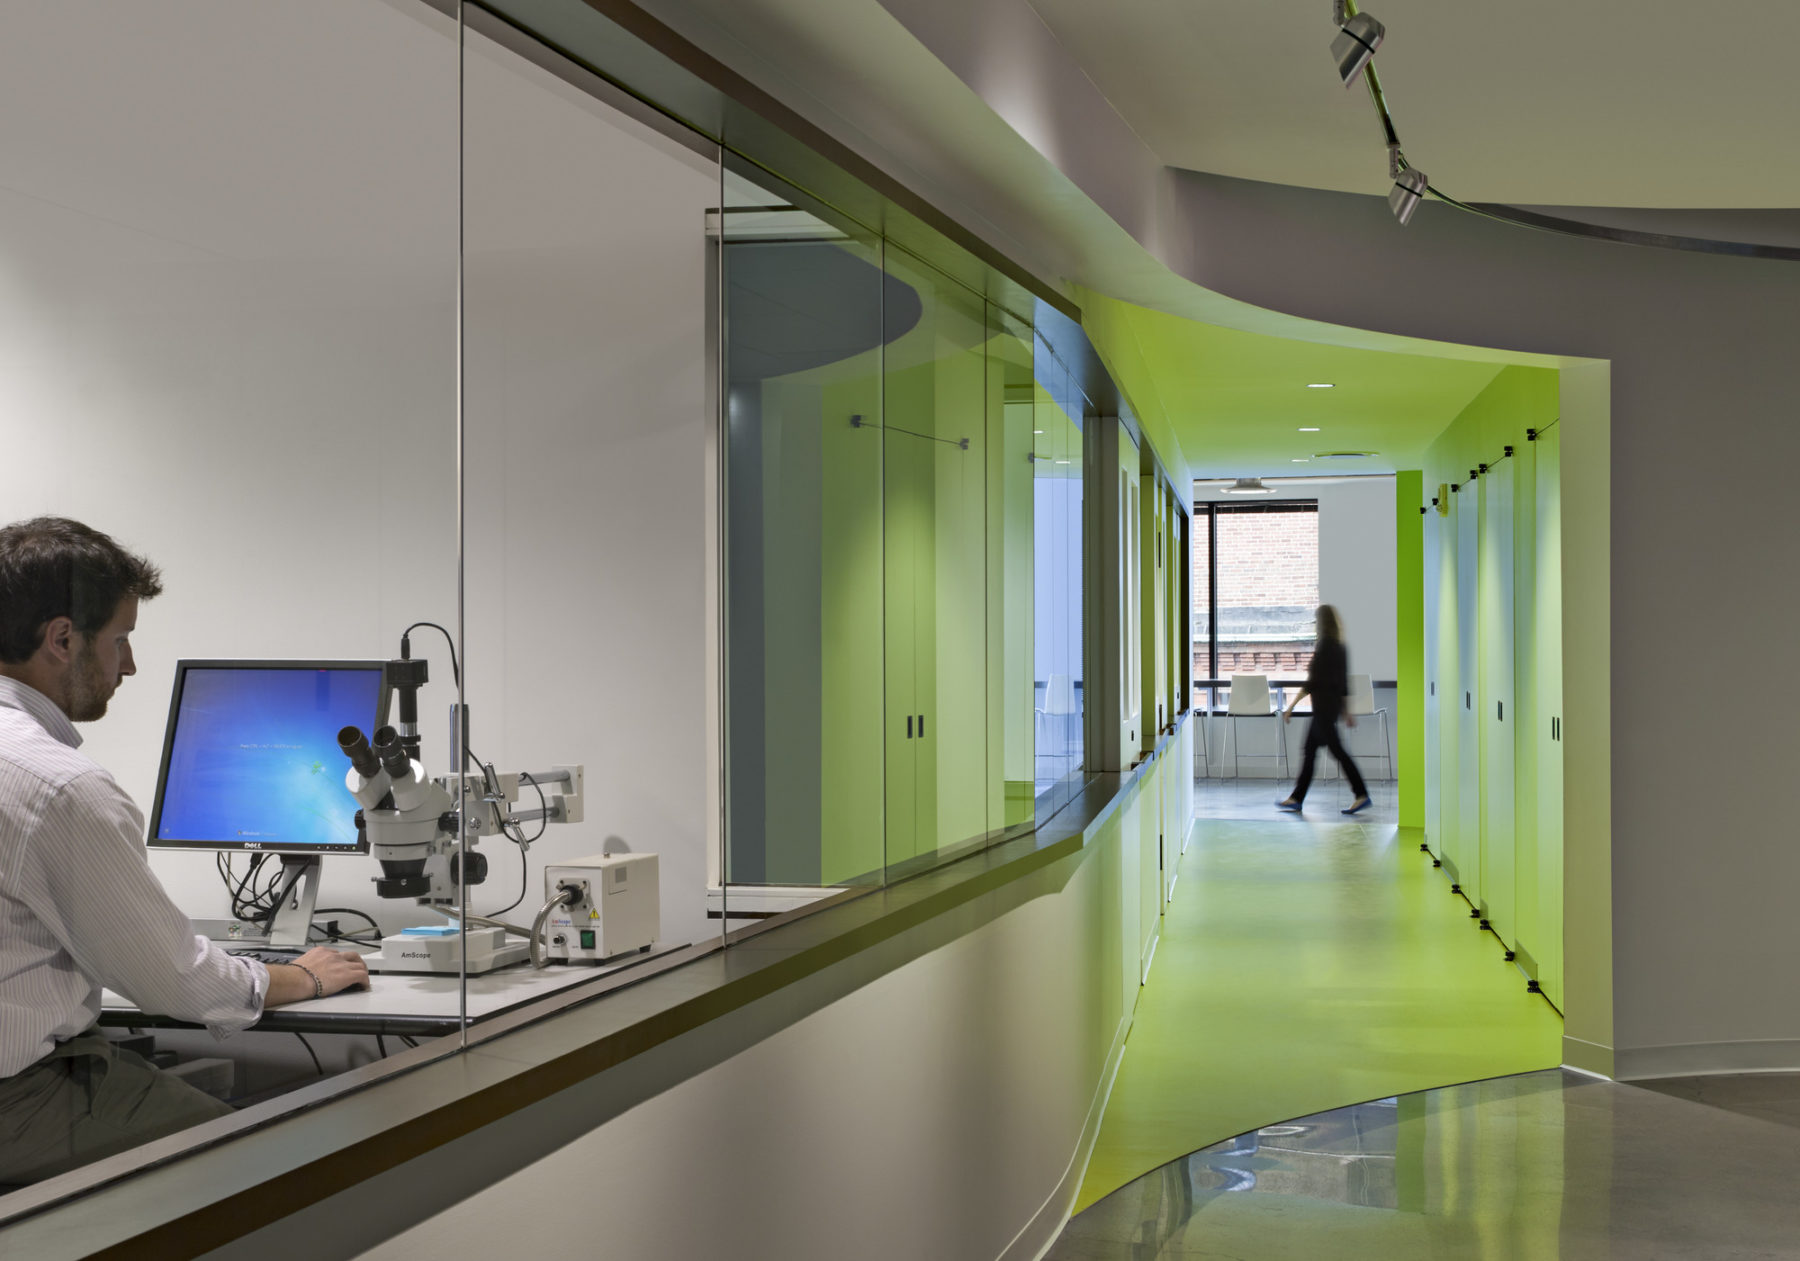 Man working on his desktop and microscope in a see-through office area towards the left, while we can look and see a greenly lit hallway on the right.